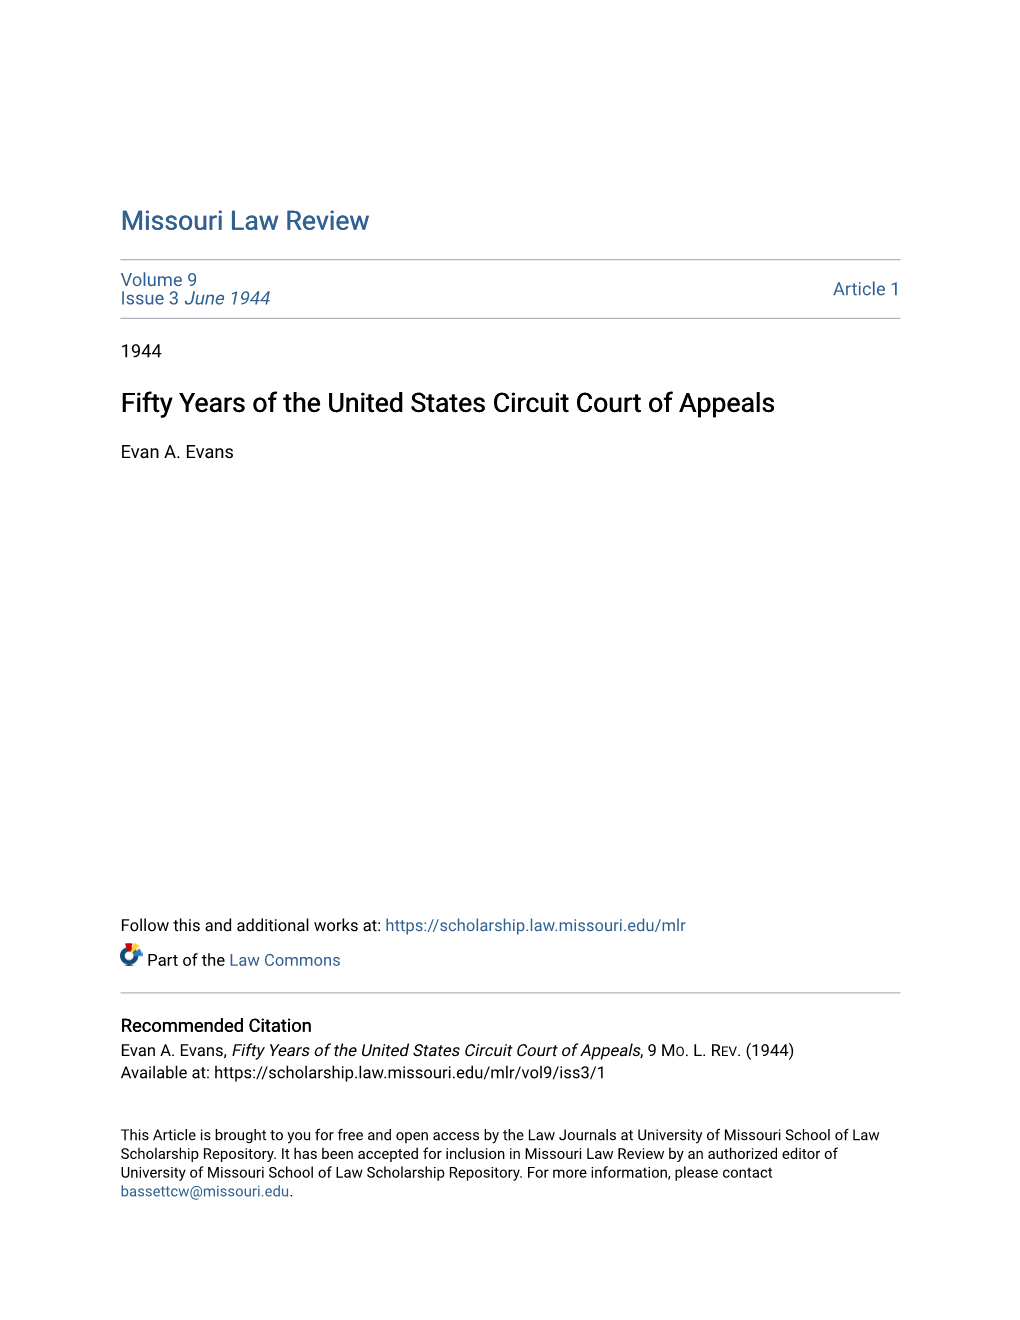 Fifty Years of the United States Circuit Court of Appeals